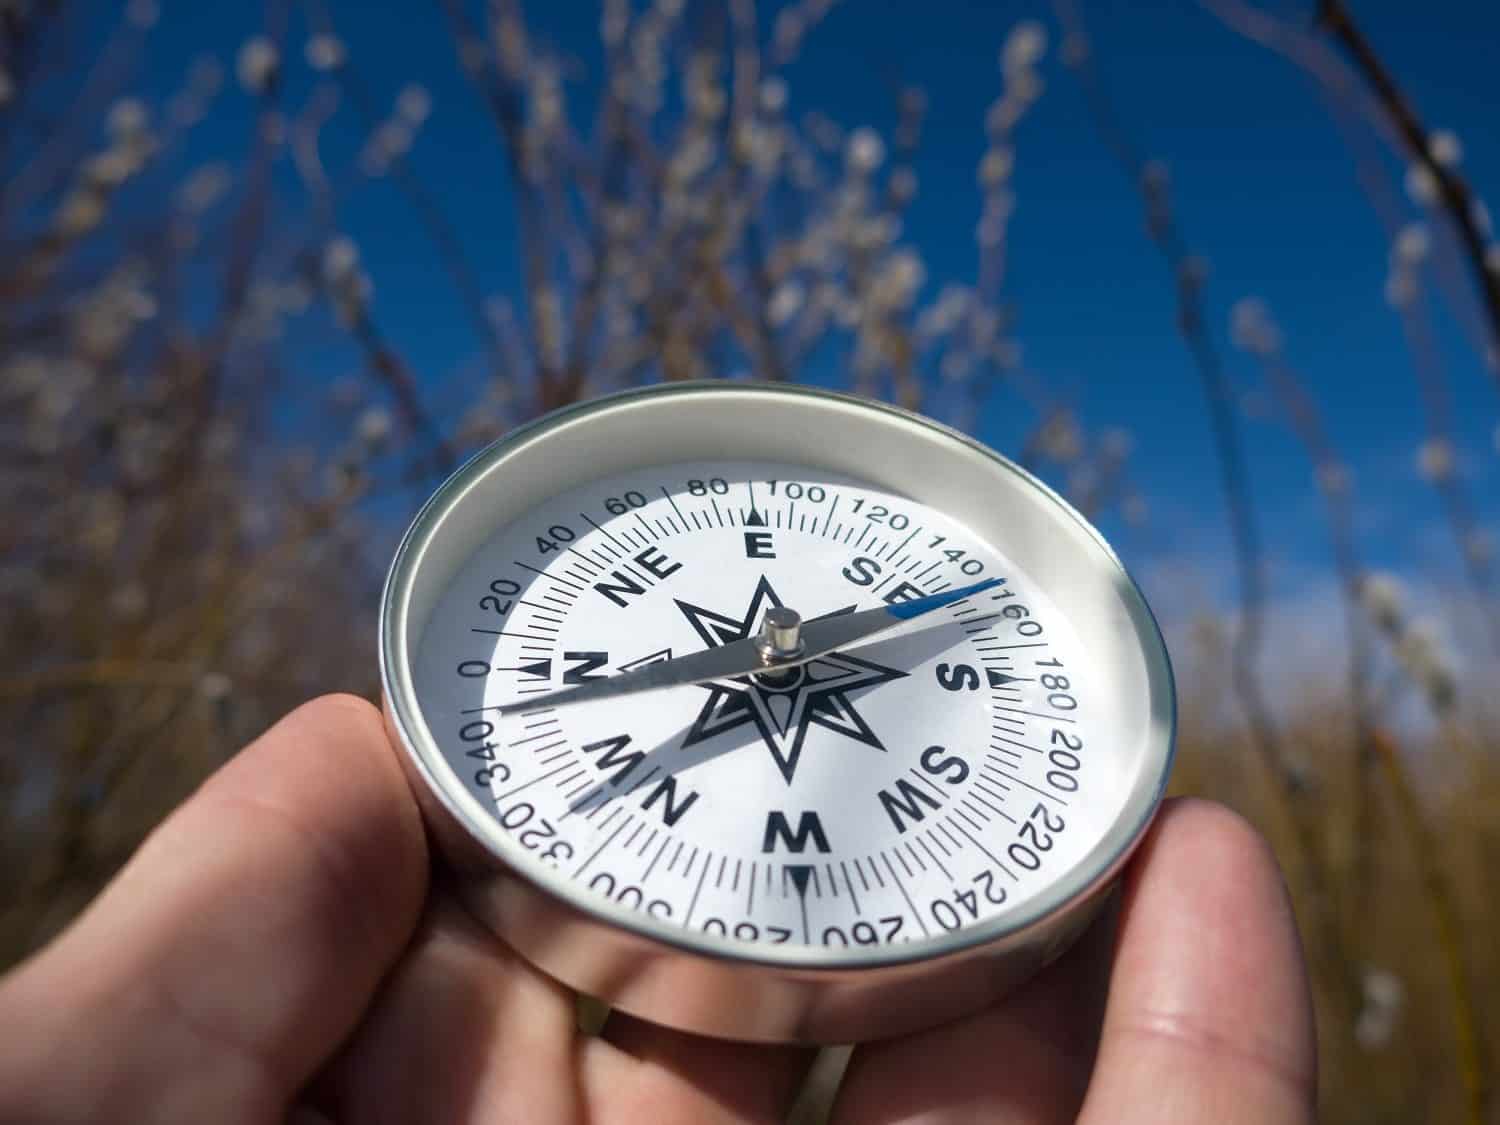 Winter-spring hiking (spring independent travel in forest and river, willow catkins), camping equipment - follow the compass (shoot an azimuth), trail orienteering (explaining the ground)